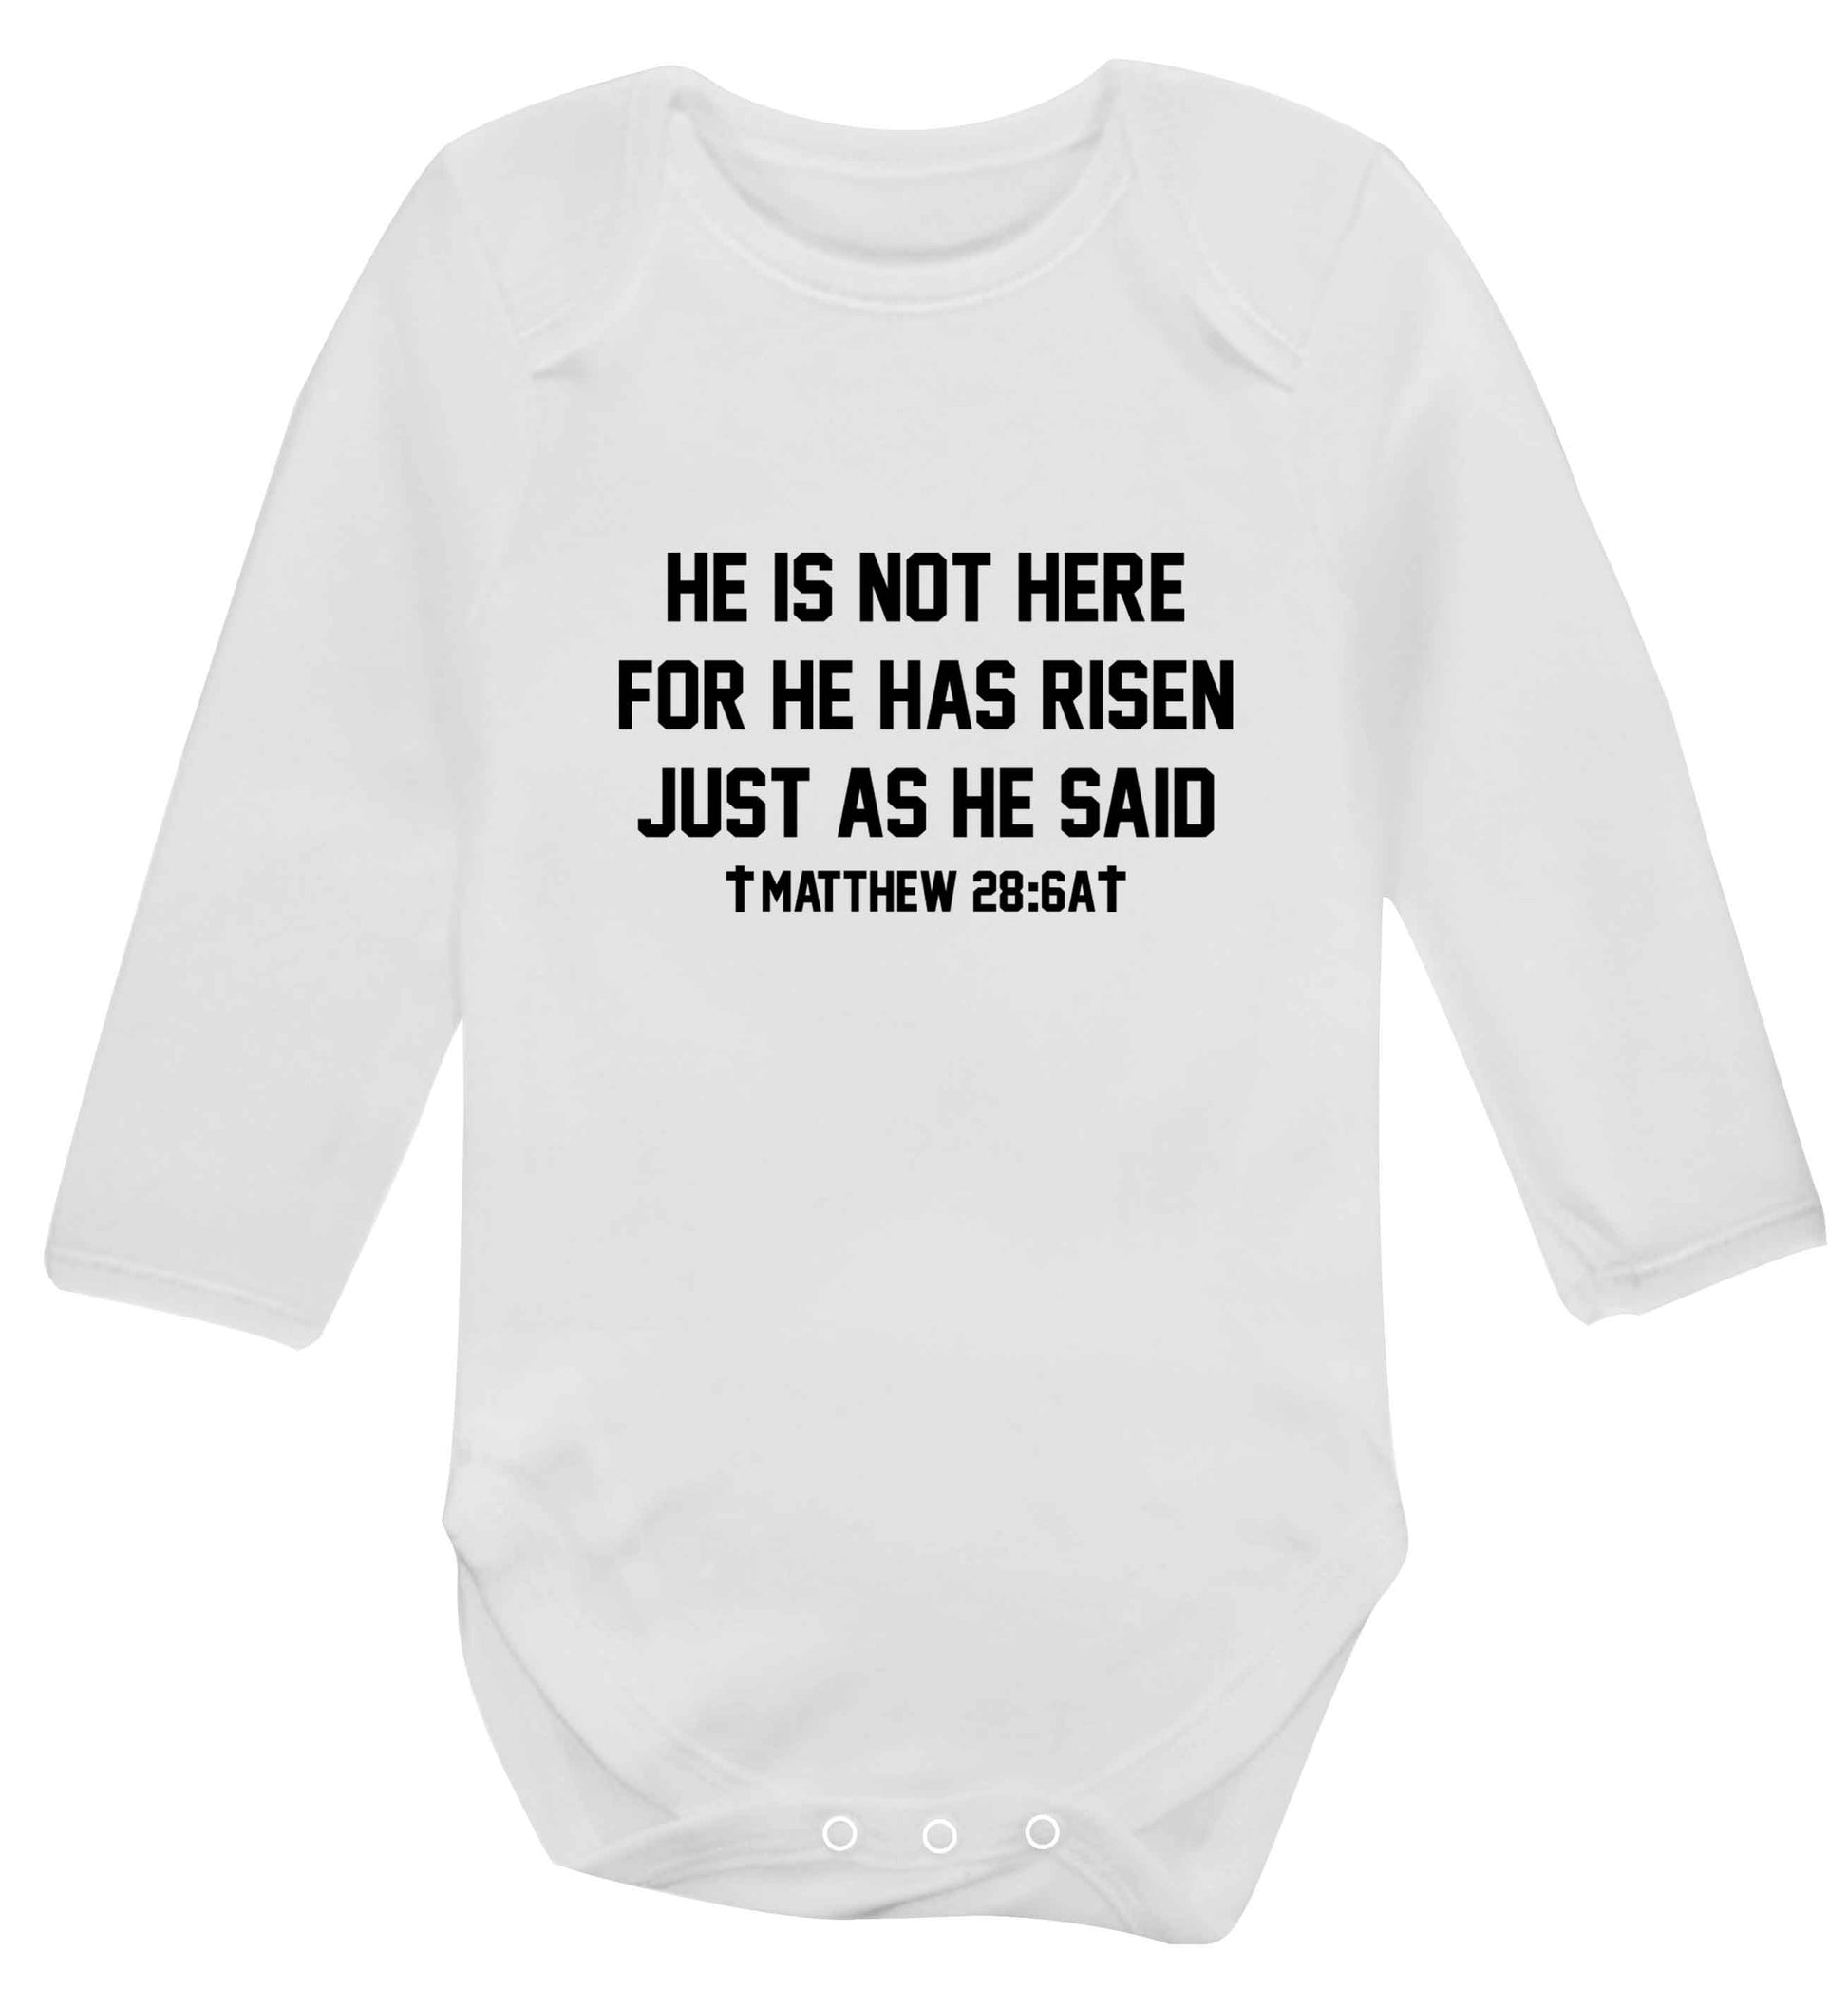 He is not here for he has risen just as he said matthew 28:6A baby vest long sleeved white 6-12 months